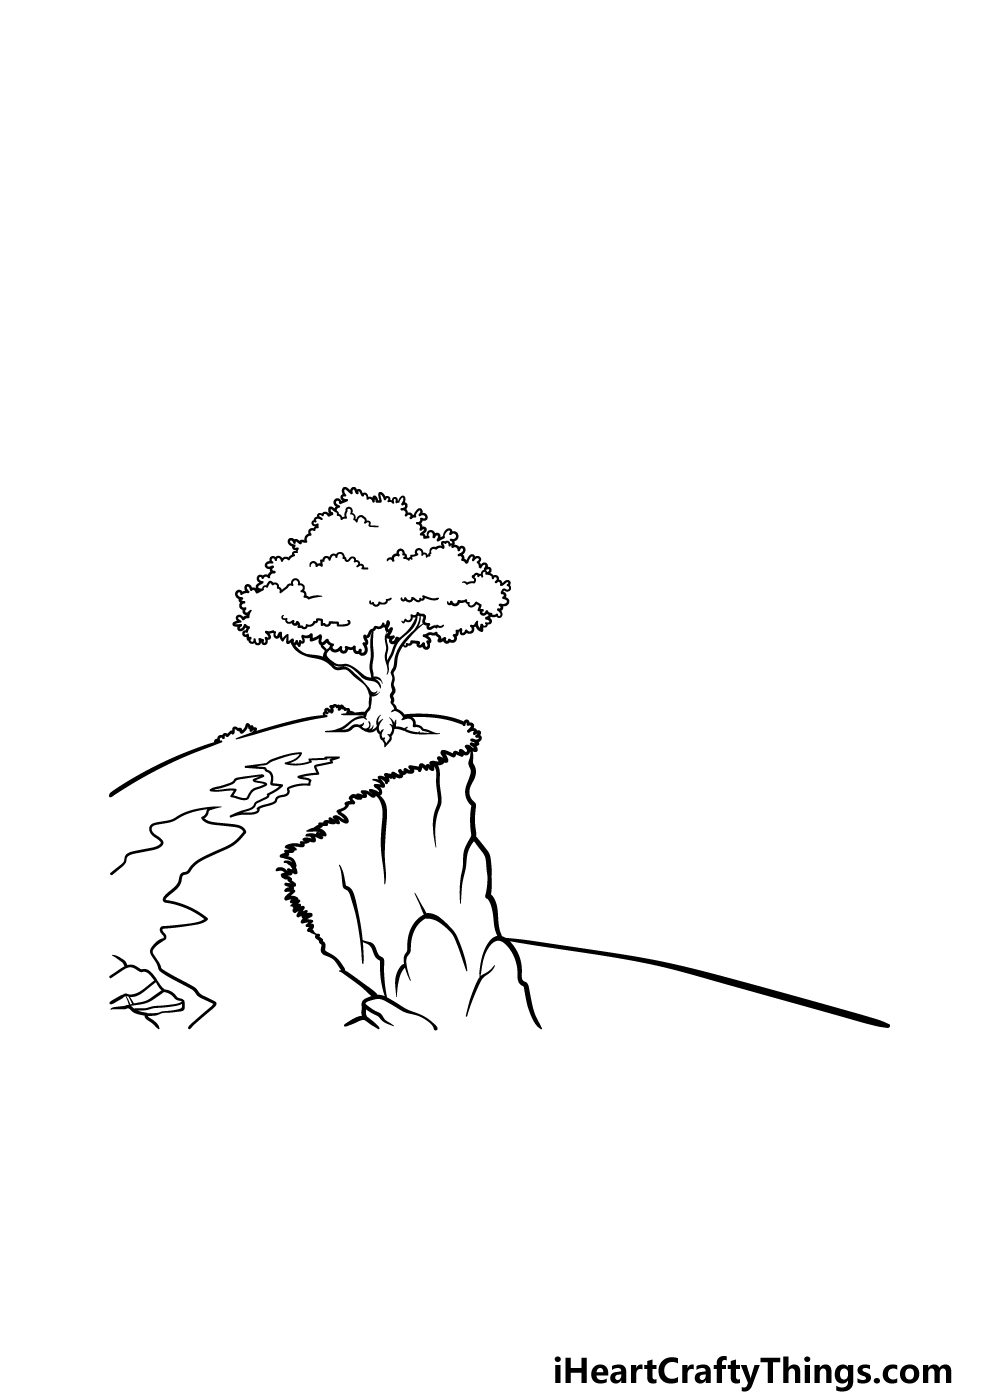 drawing a cliff step 5